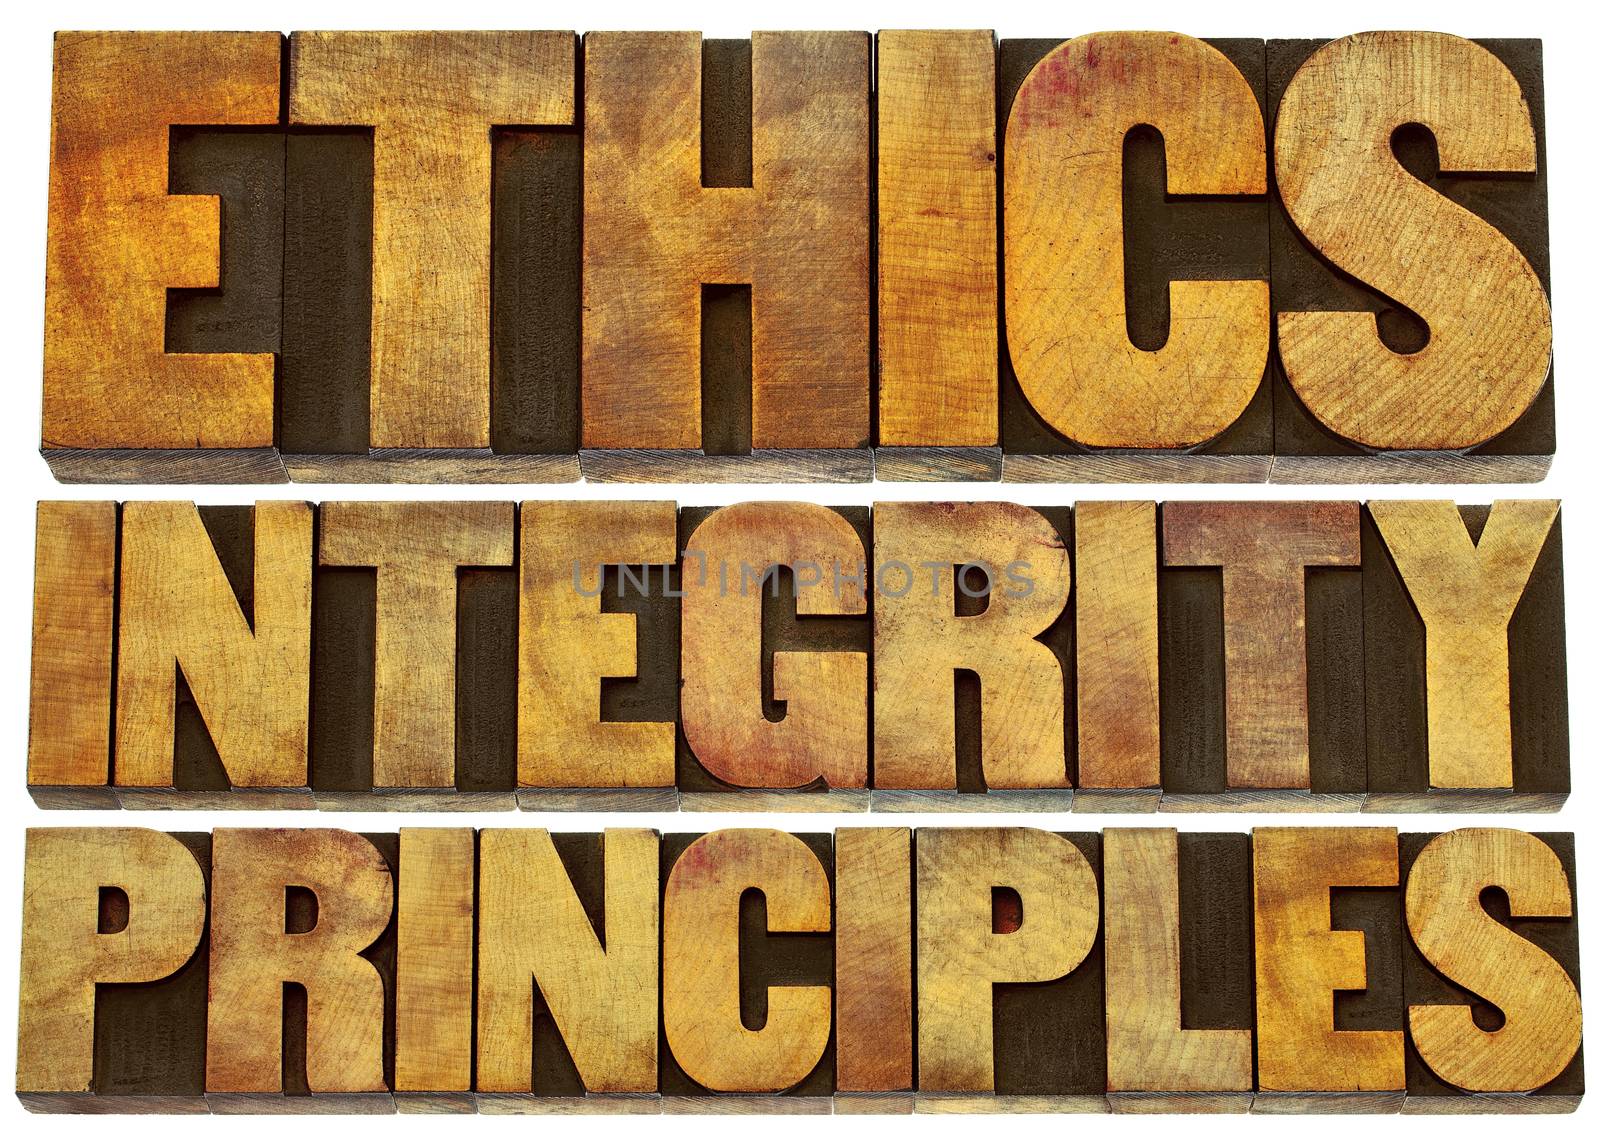 ethics, integrity and principles word abstract - isolated text in grunge letterpress wood type printing blocks